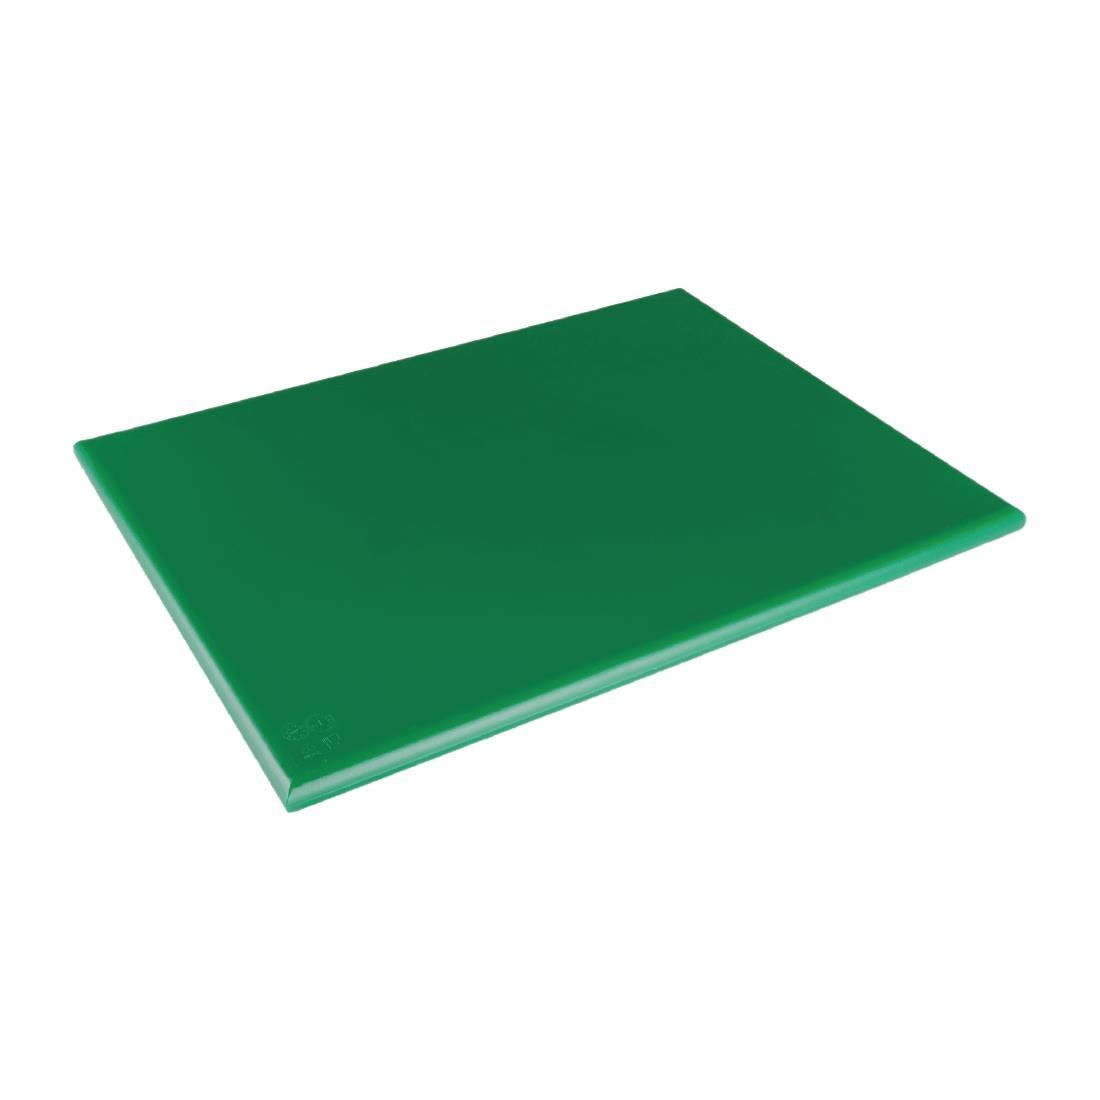 Hygiplas Extra Thick Low Density Green Chopping Board Large - HC876  - 1